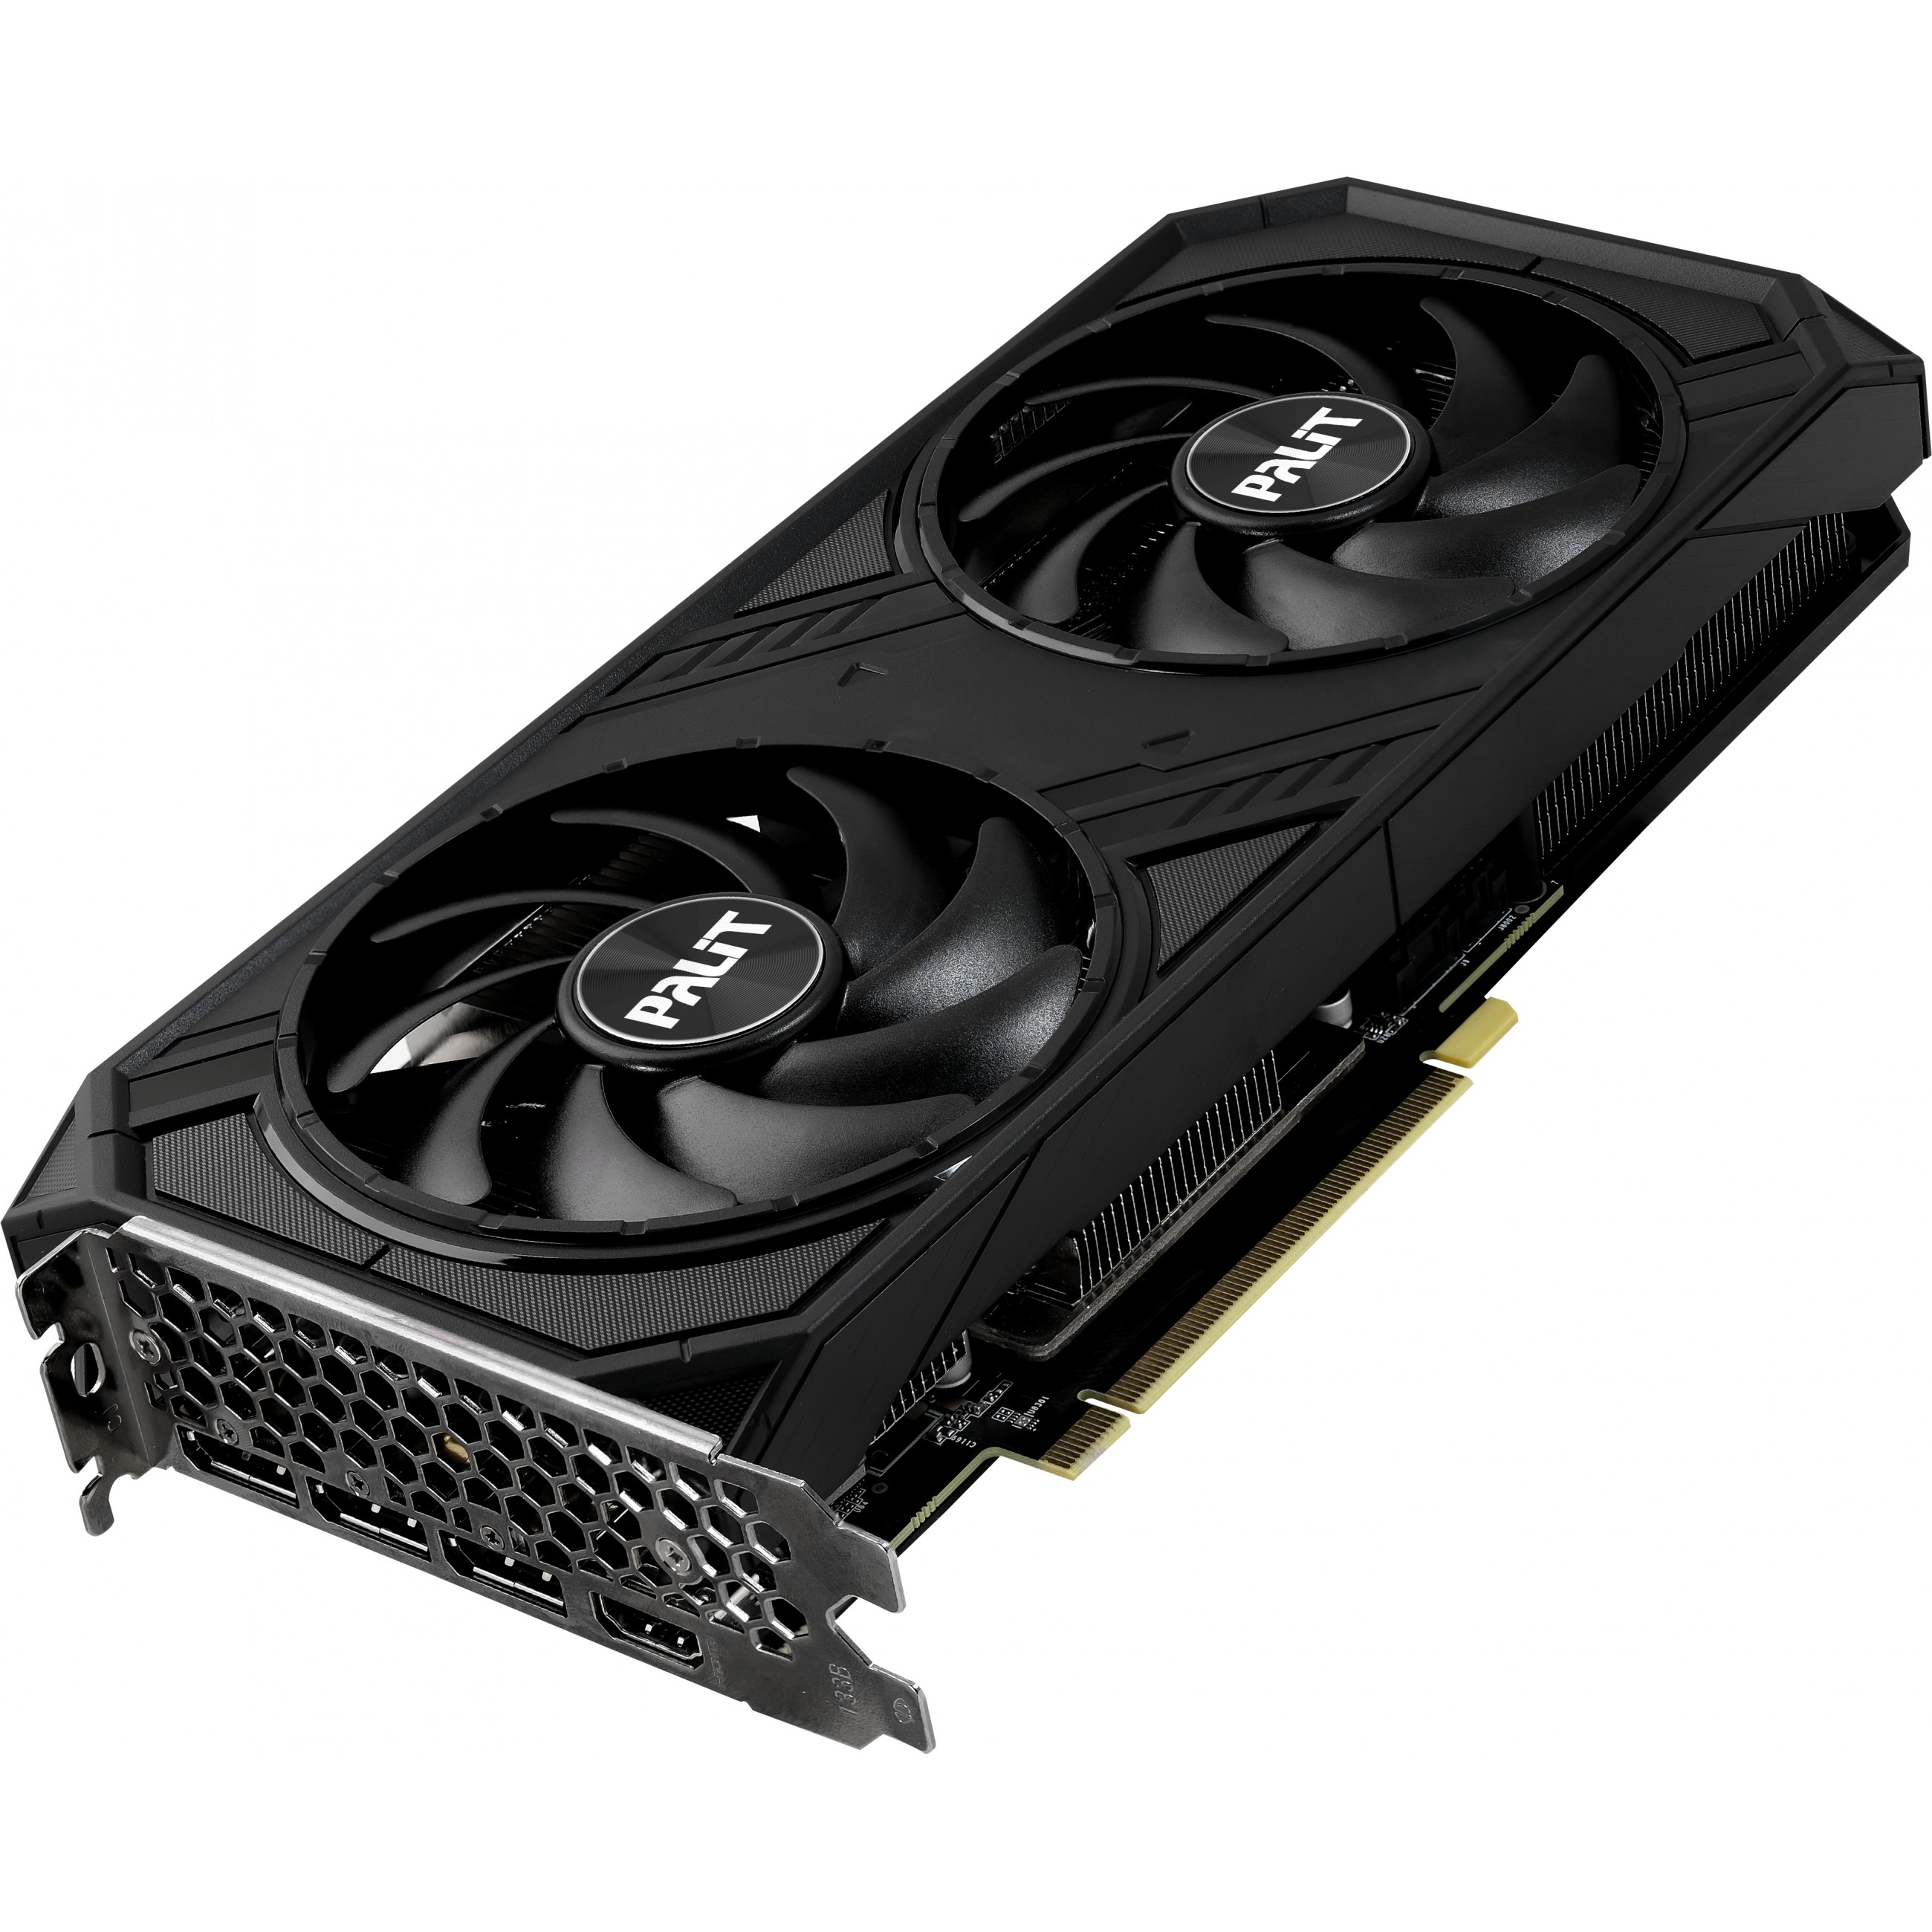 Palit NED4070S19K9-1047D graphics card